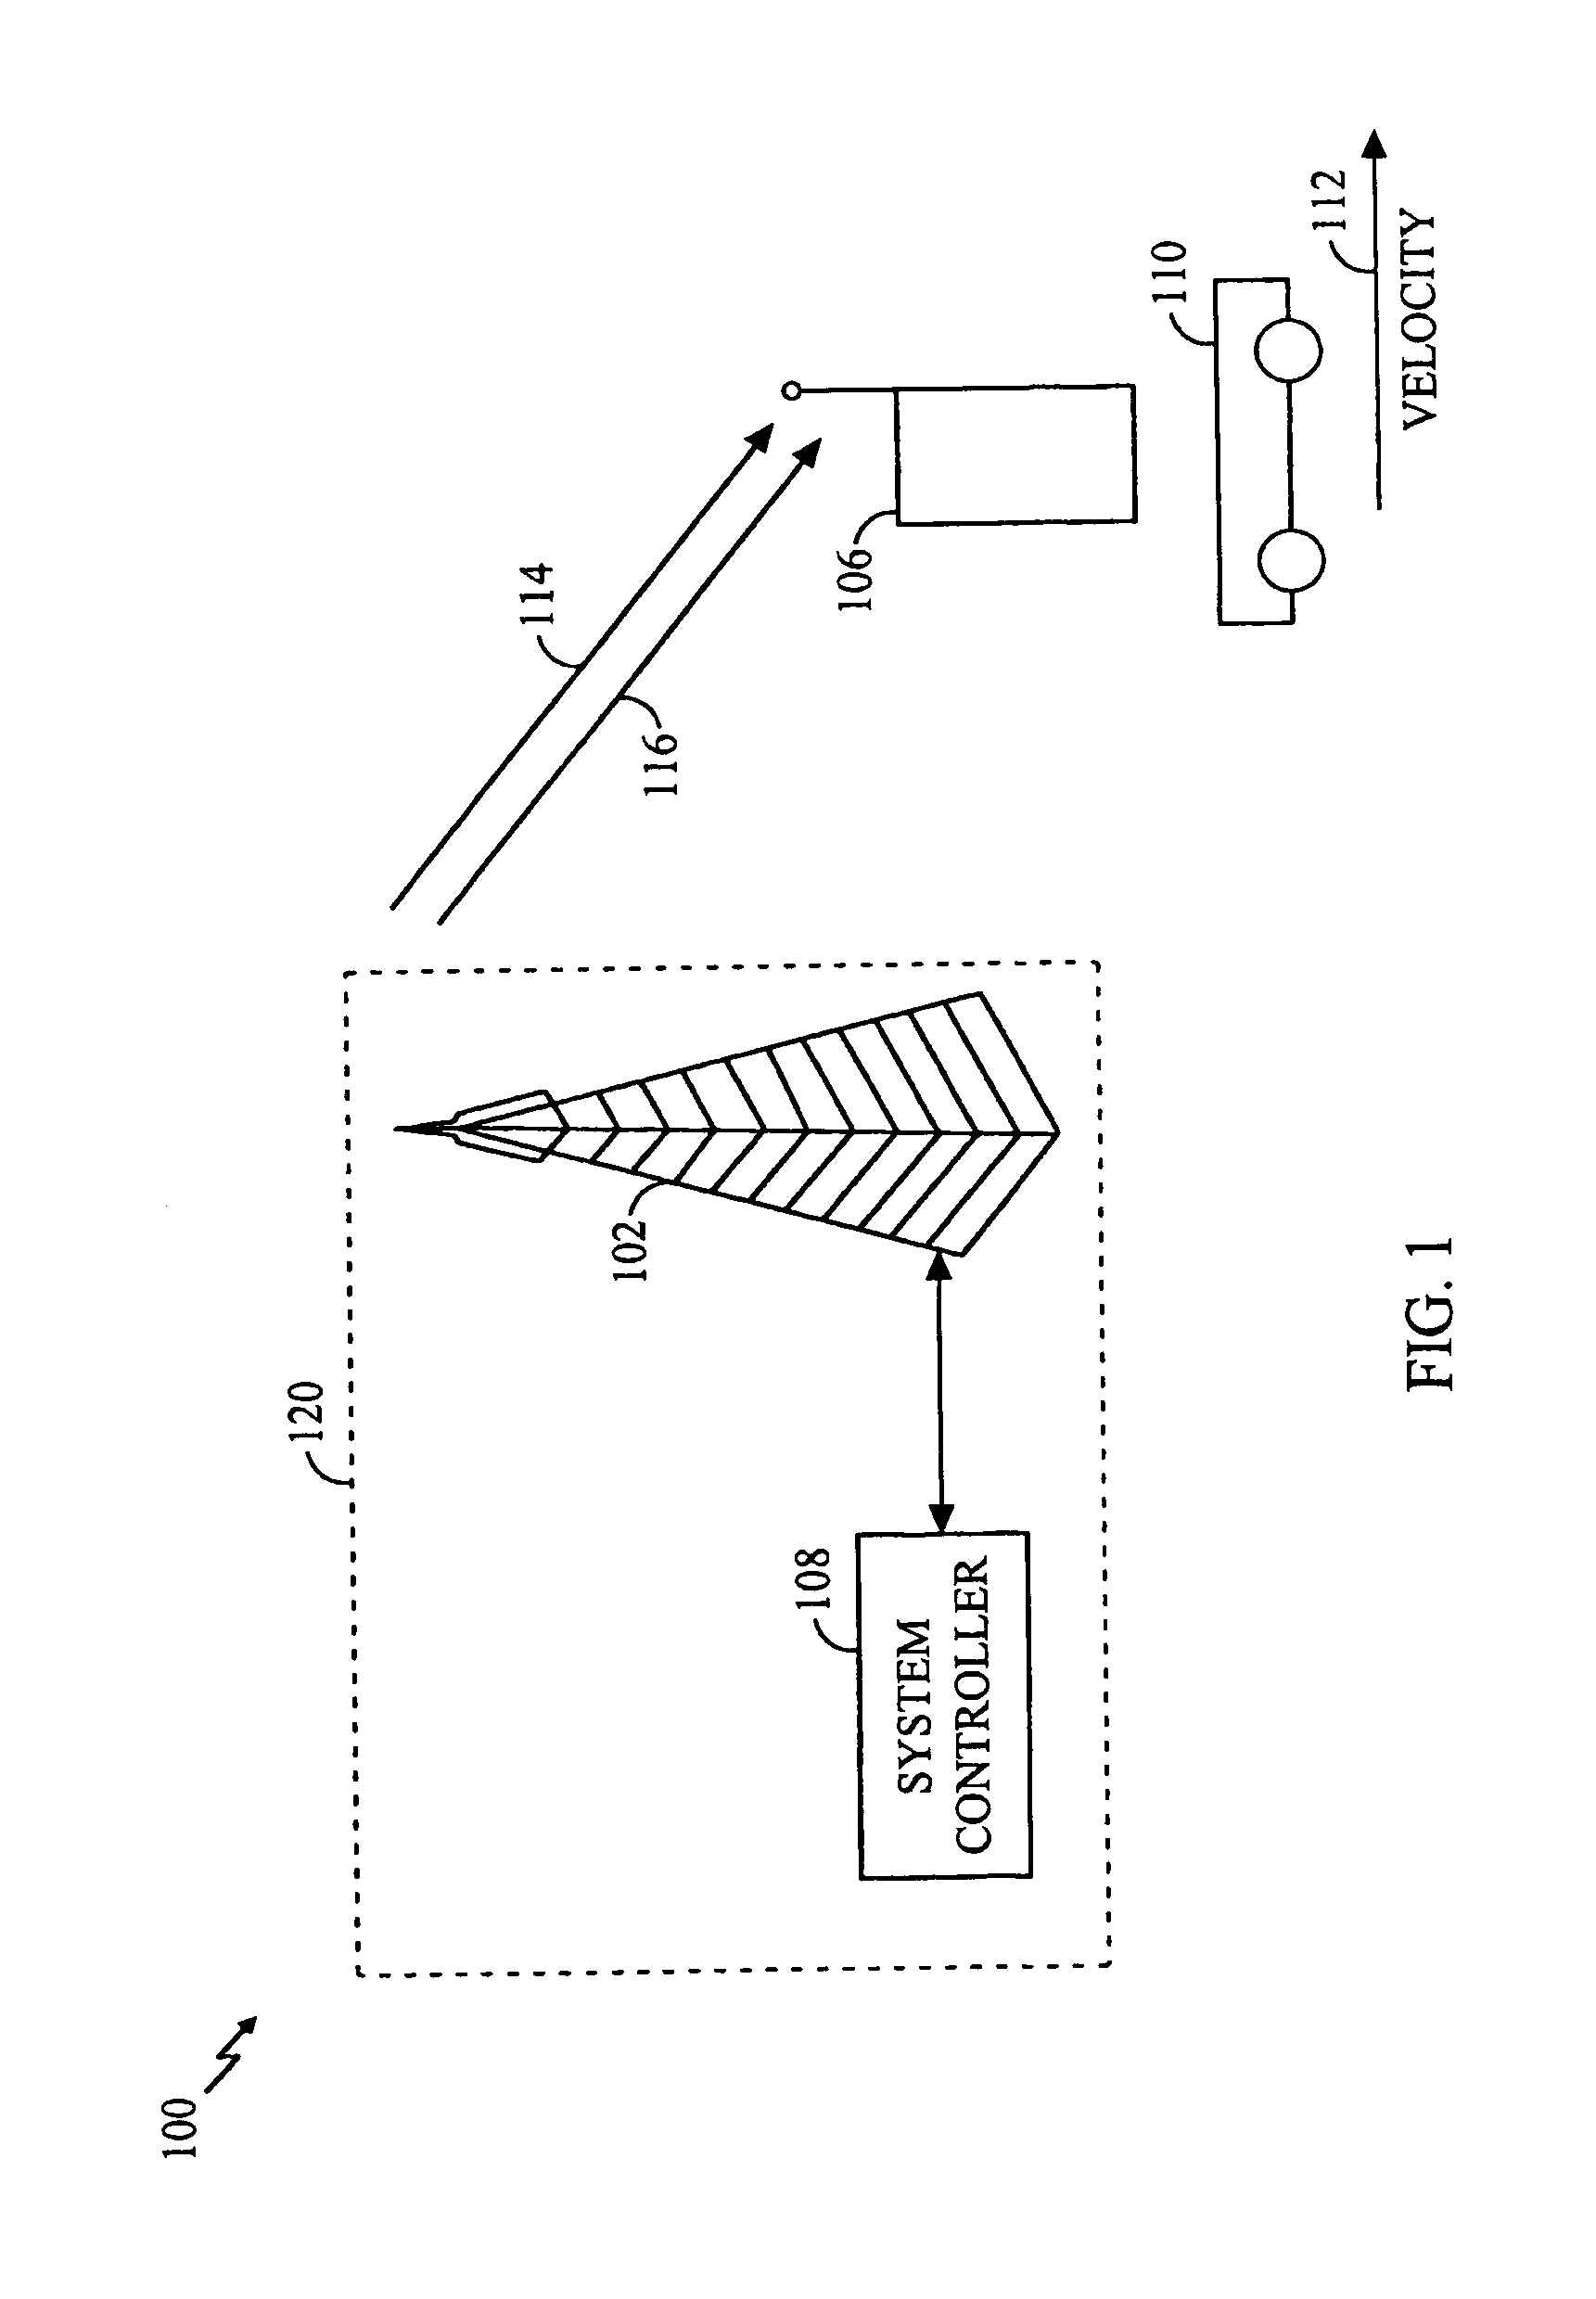 Velocity responsive filtering for pilot signal reception